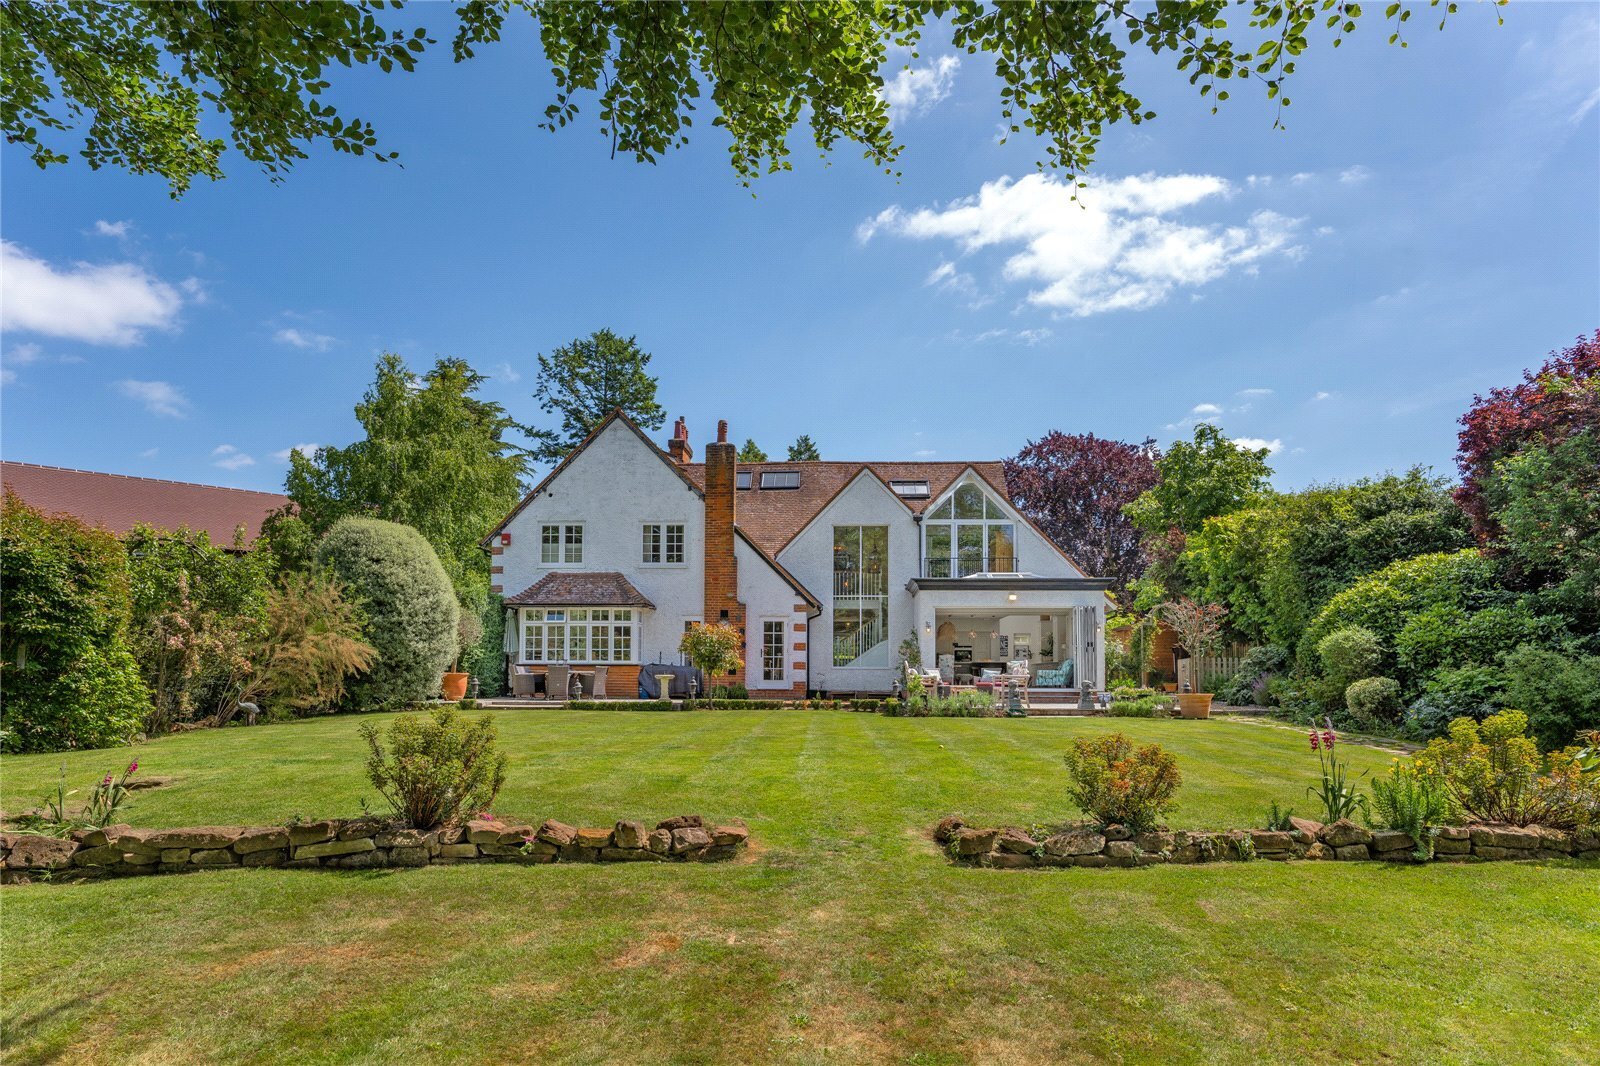 A Tastefully Presented Home In Buckinghamshire Which Offers A Countryside Feel In A Suburban Setting